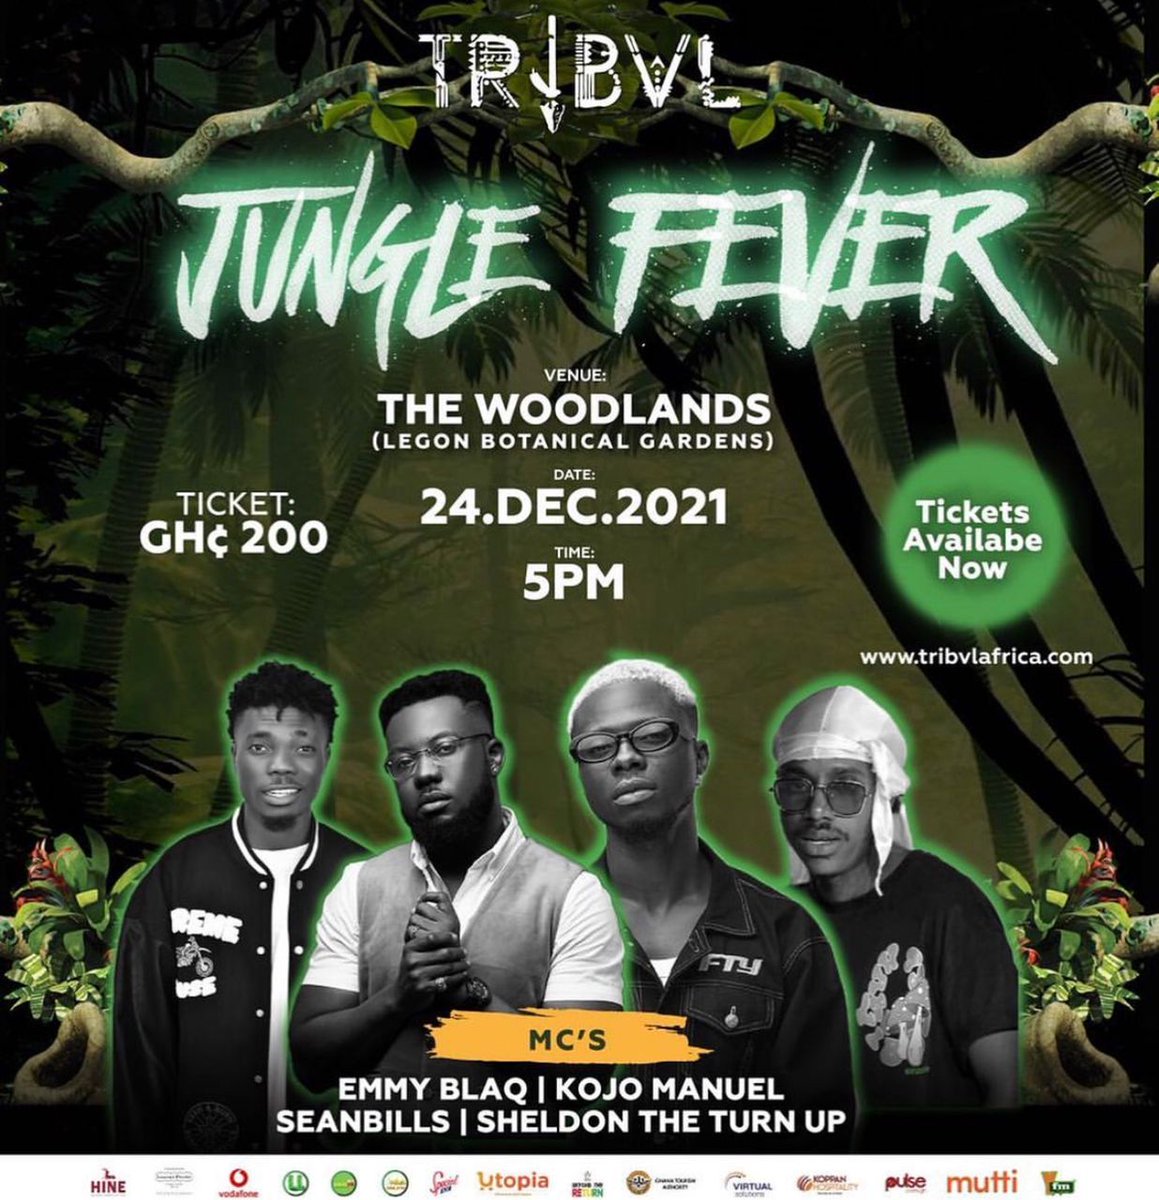 It's Happening This Friday, 24th December 2021. Come Let's Party In The Woodlands (Legon Botanical Gardens)